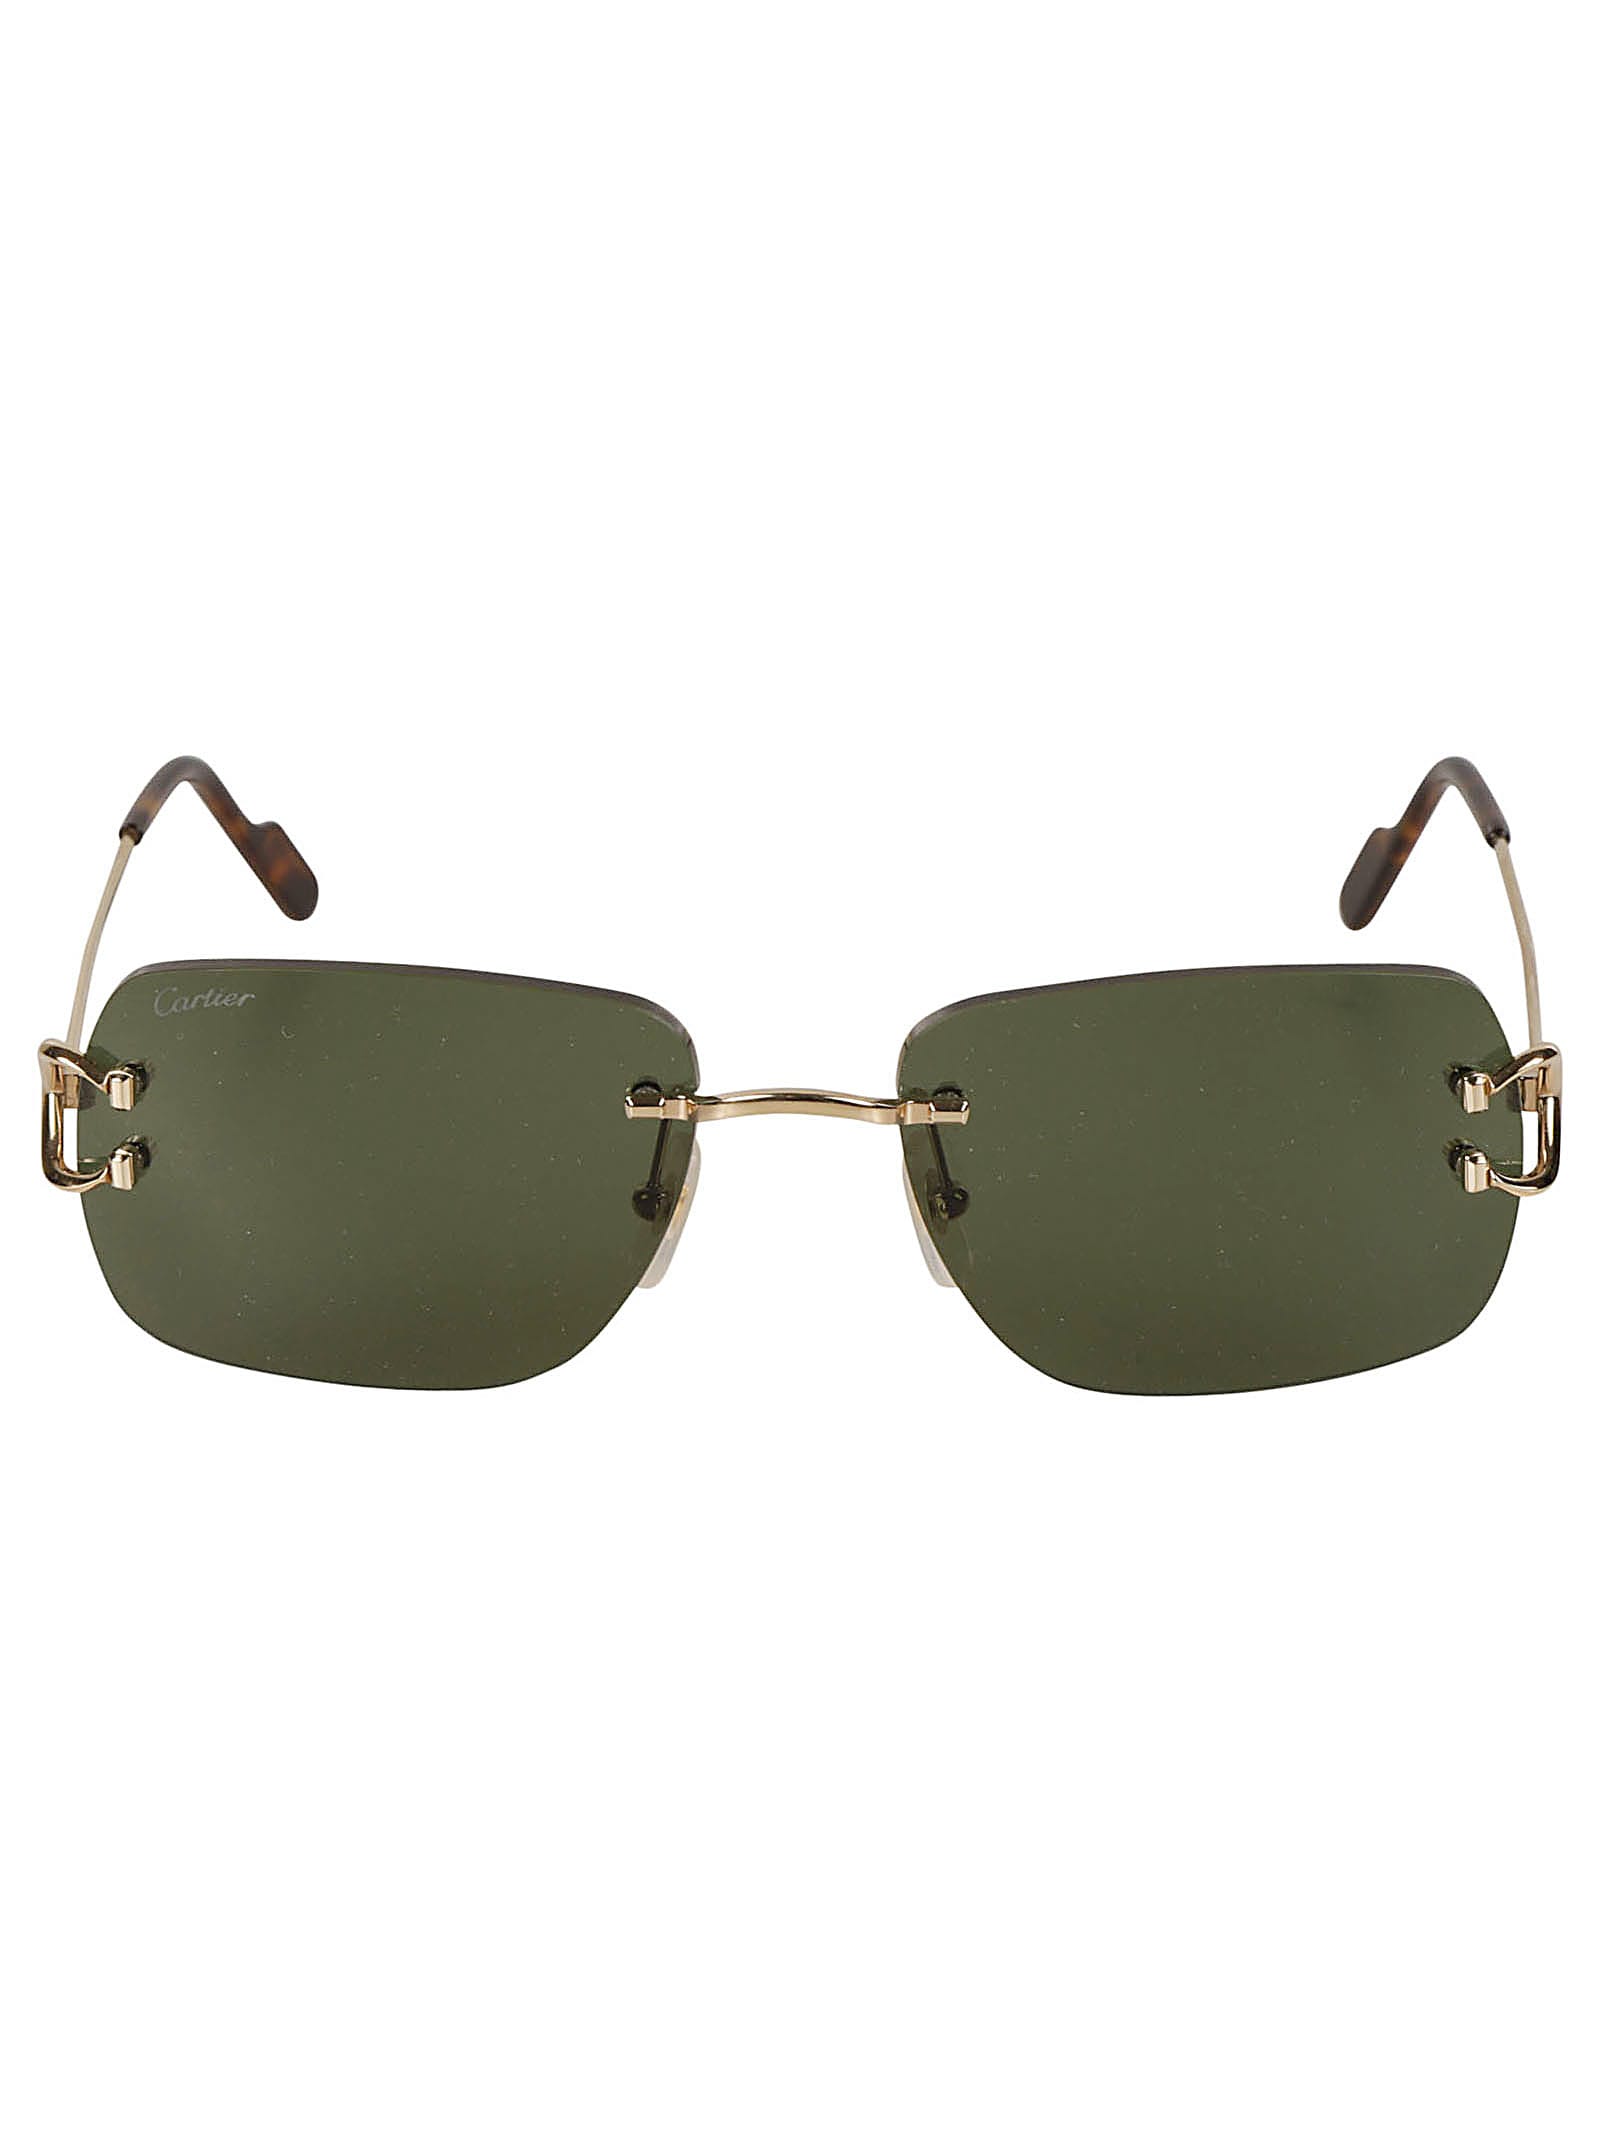 Cartier Frame-less Square Sunglasses Sunglasses In Gold/green